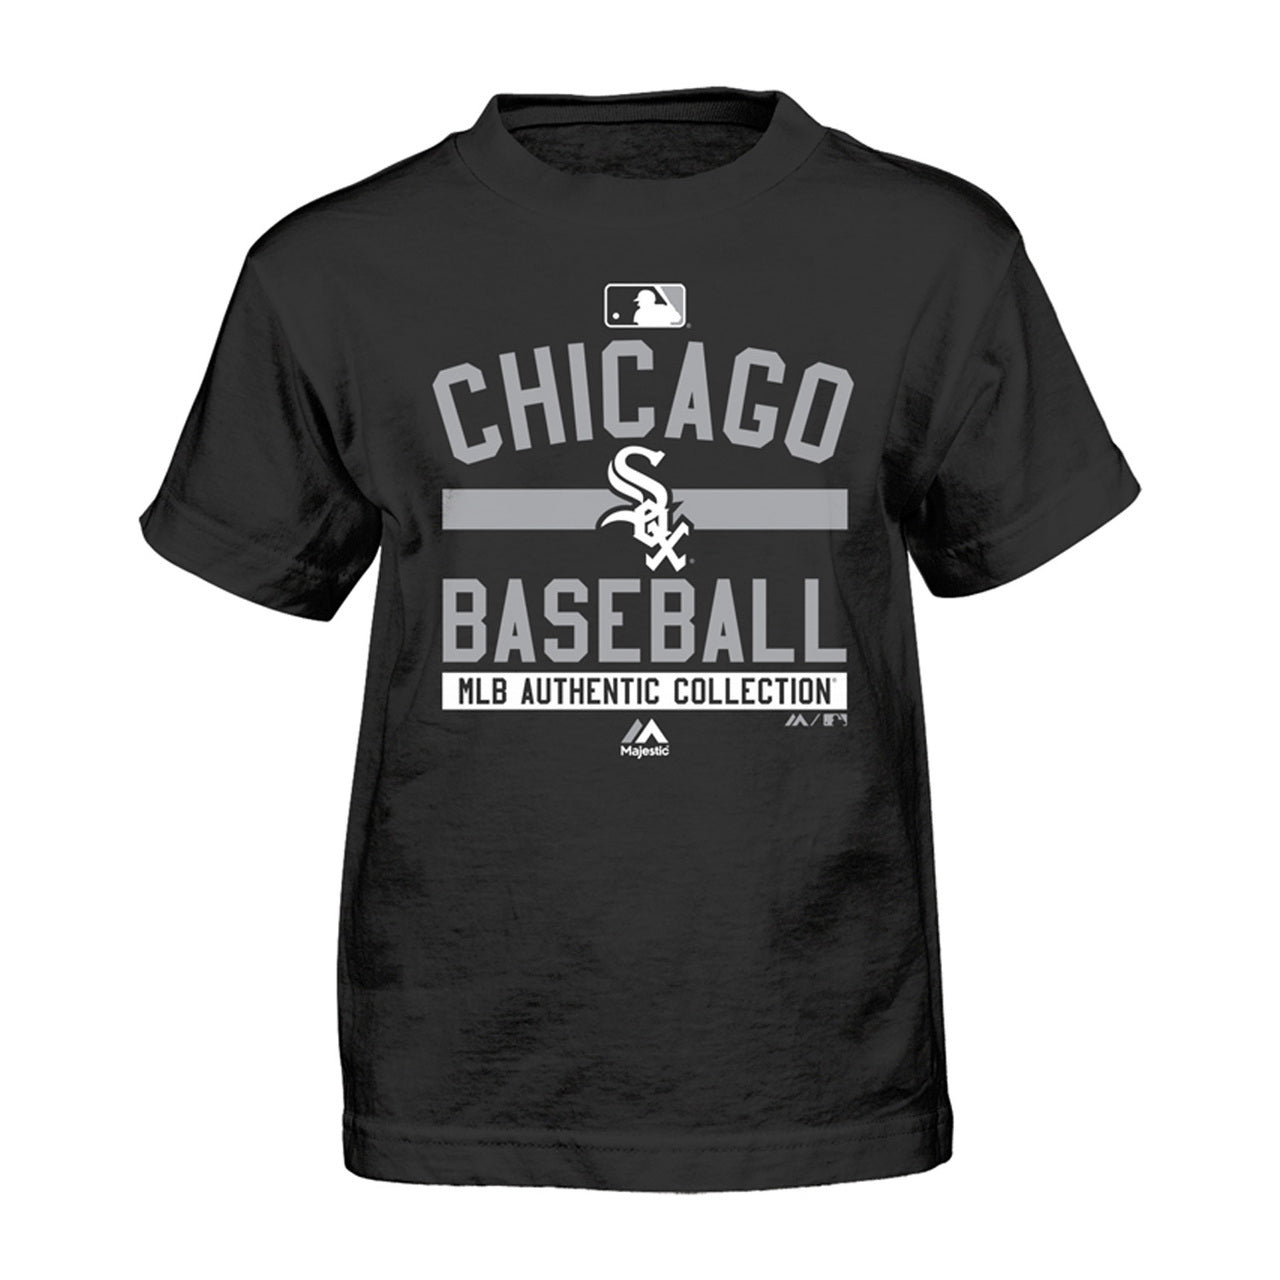 Chicago White Sox Majestic Youth On Field Team Black T-Shirt